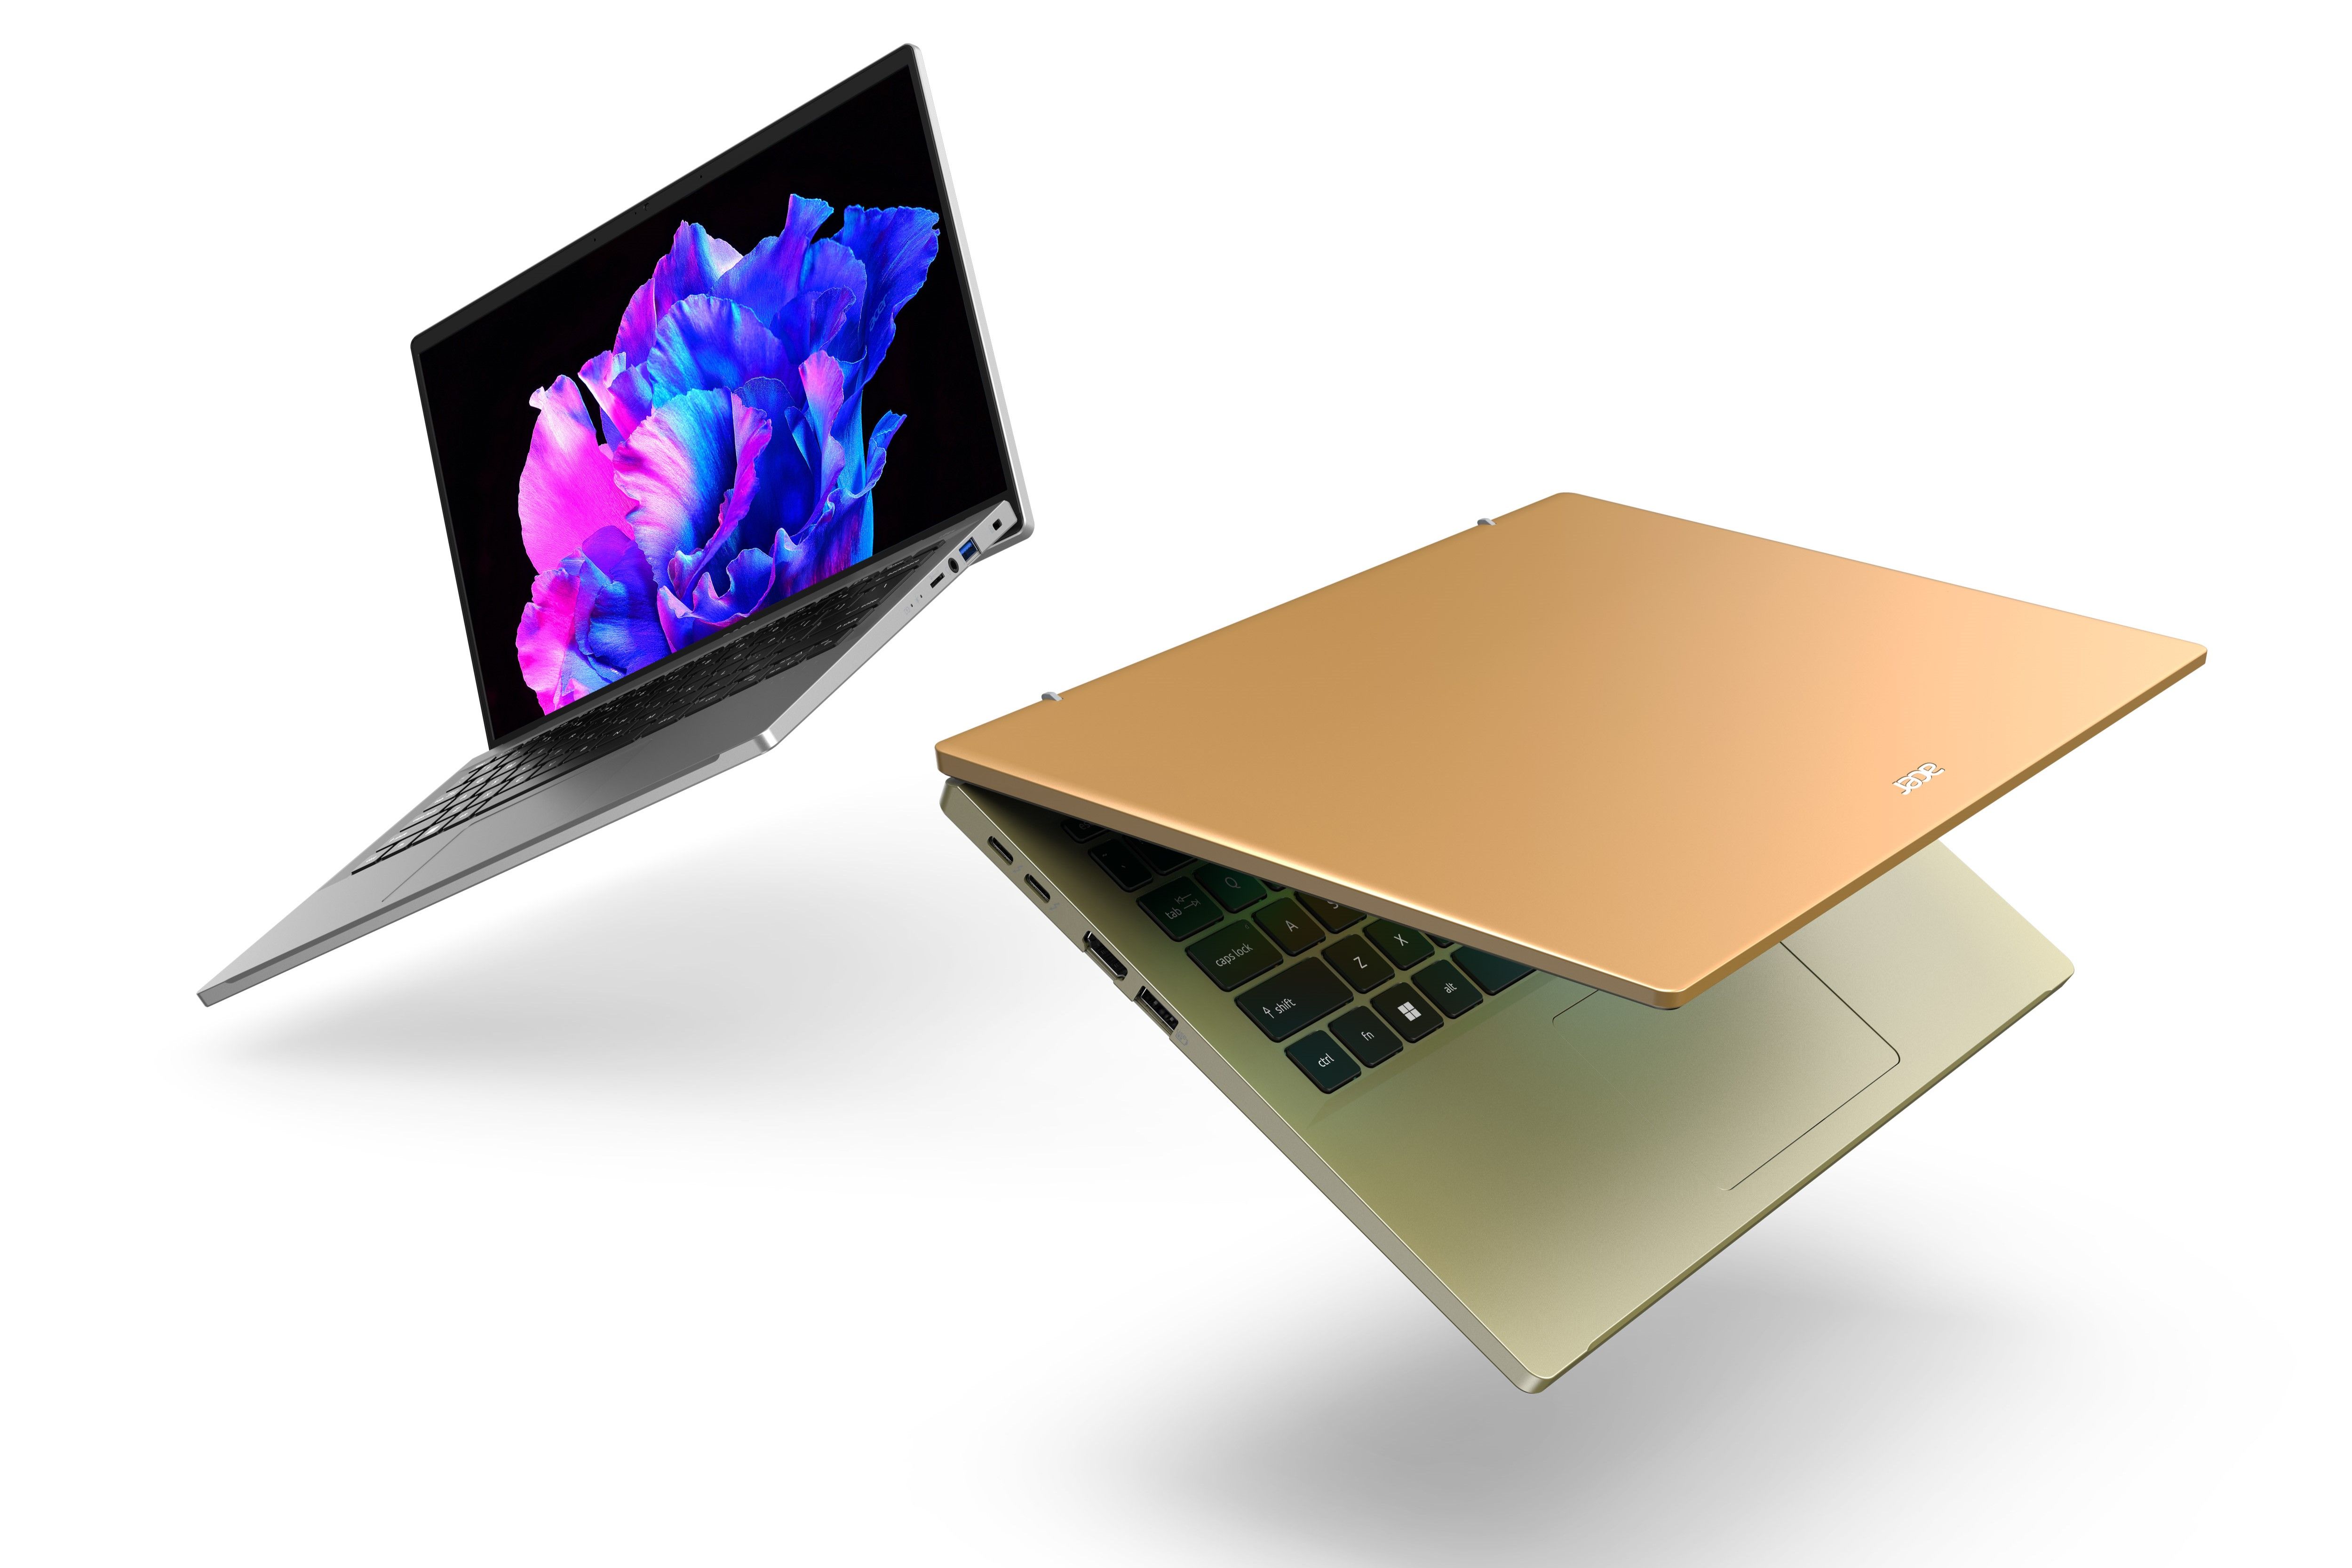 Two view of the Acer Swift Go 13. One is a silver-colored model with the lid open at about 100 degrees and facing left, while the other is a gold and orange model with the lid nearly closed and facing right.